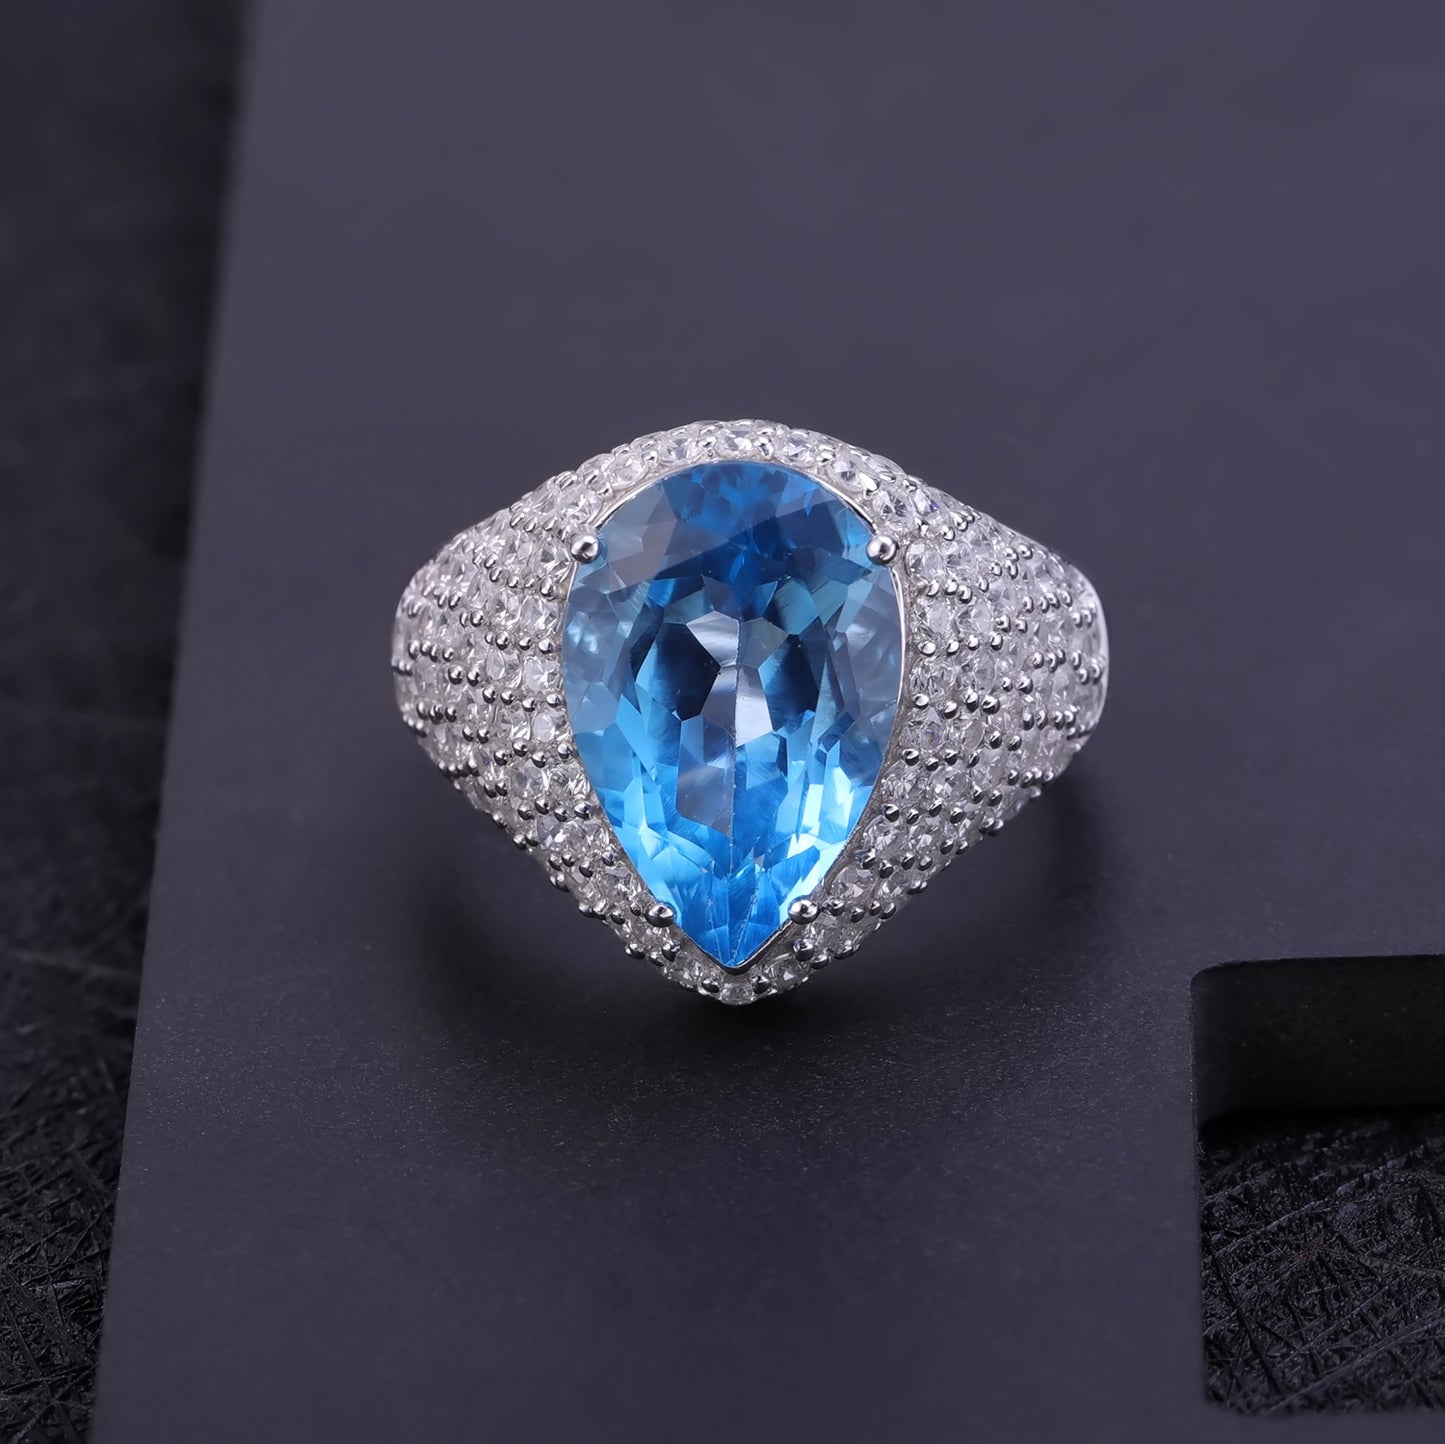 Natural Topaz Pear Shape Luxury Cathedral Silver Ring for Women